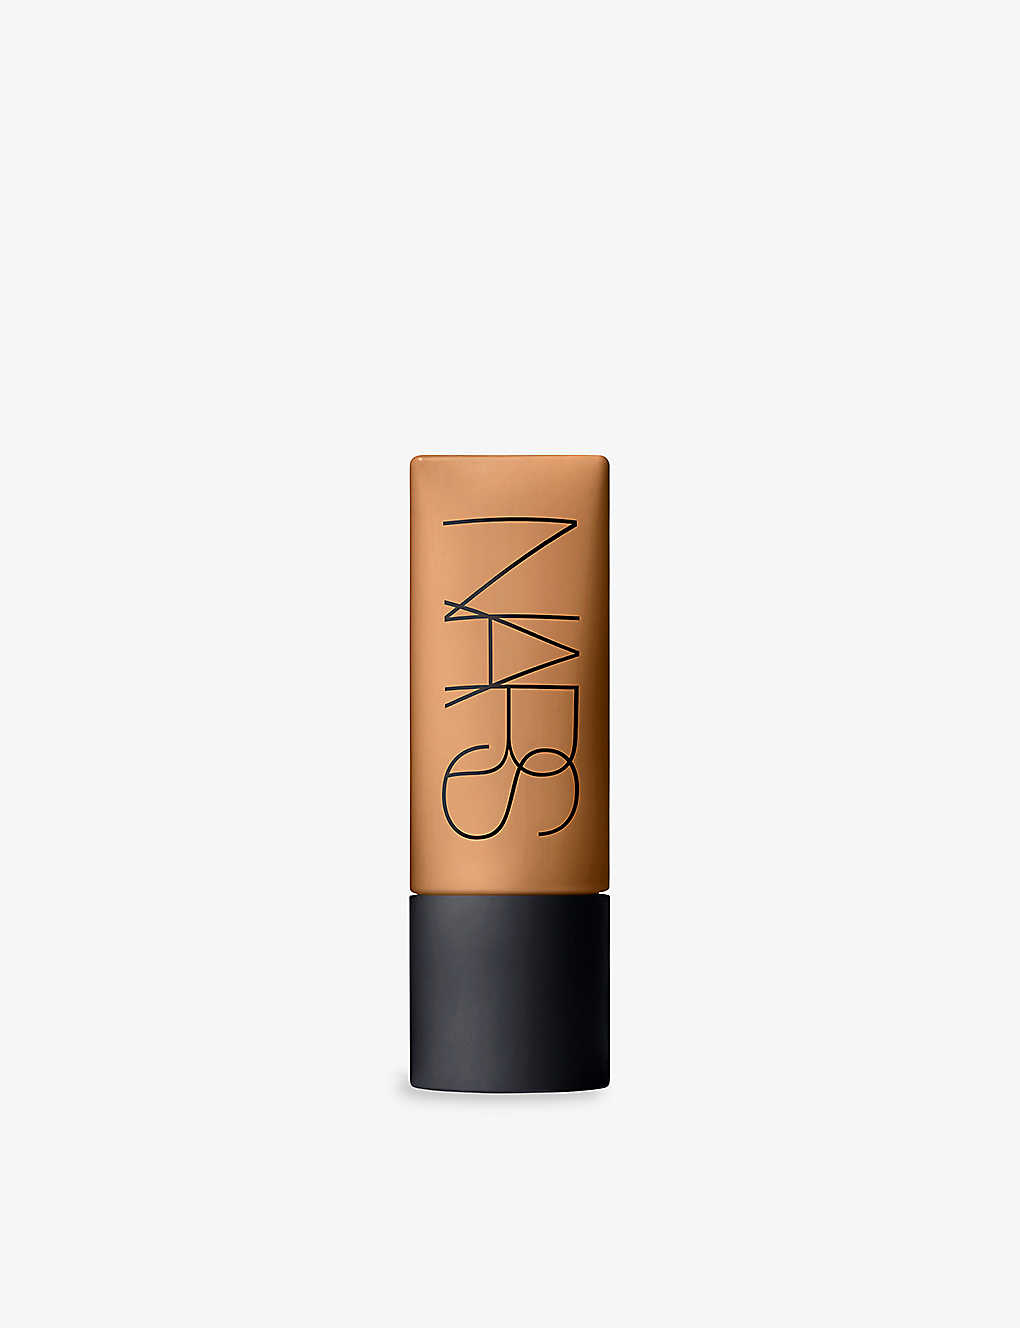 Nars Huahine Soft Matte Complete Foundation 45ml